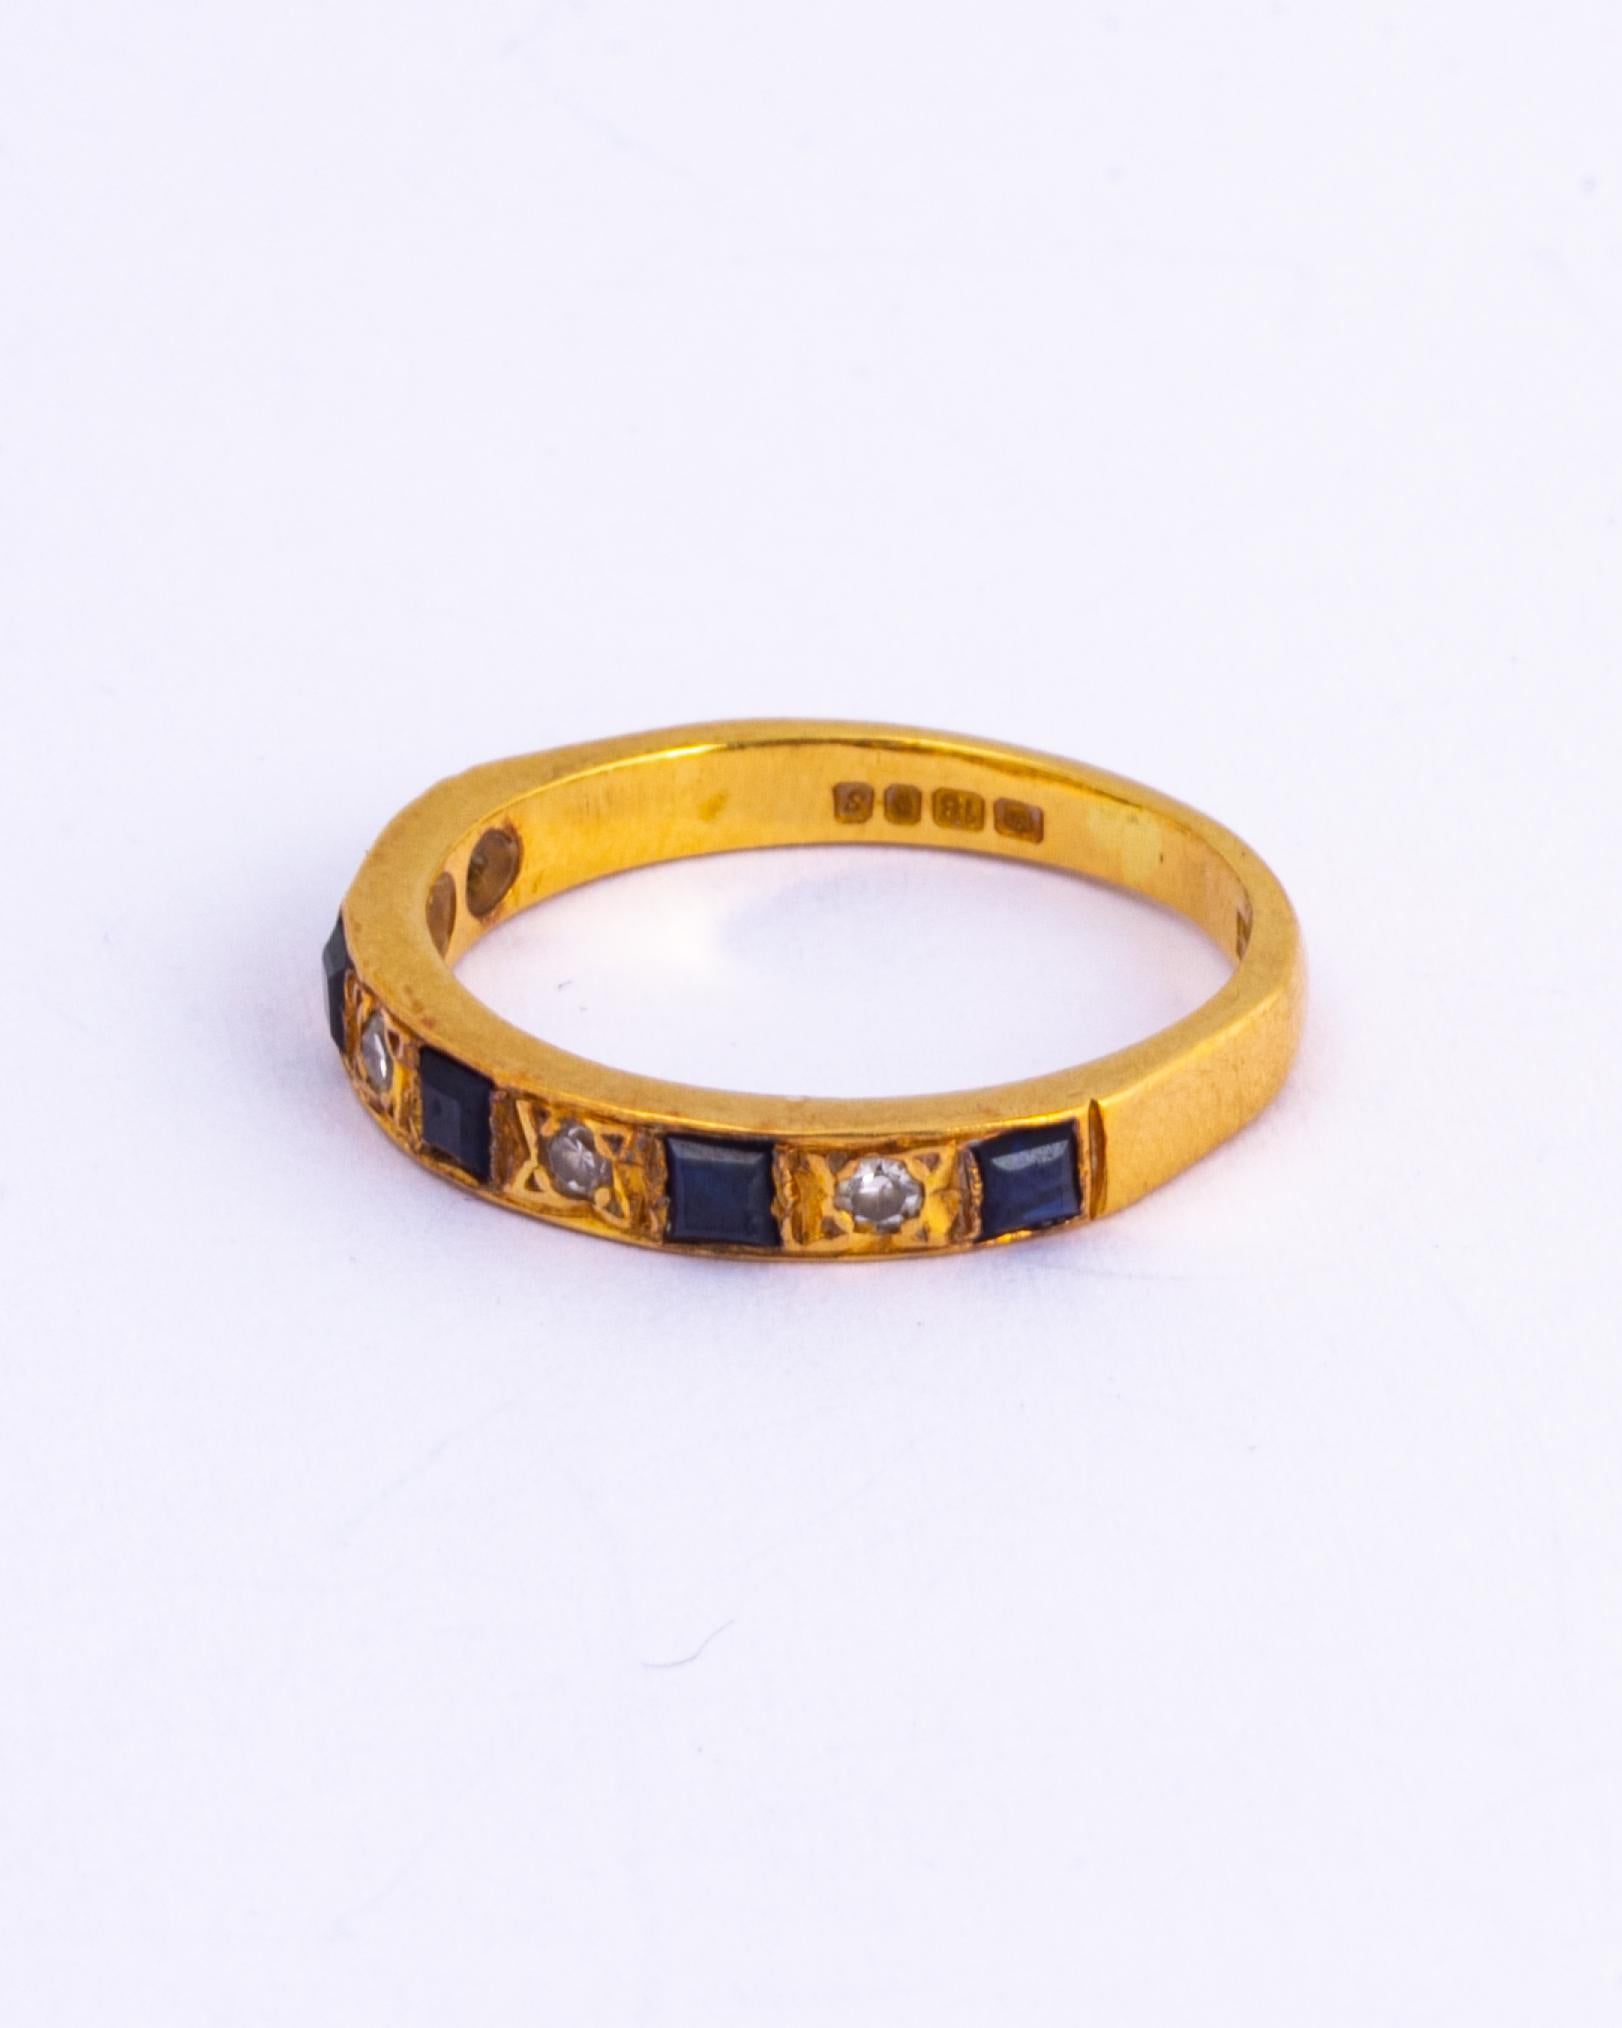 Set within this 18ct gold band there are five deep blue sapphires and four sparking diamond points. The sapphires are square cut and measure 10pts each. 

Ring Size: K or 5 3/4 
Band Width: 2.5mm

Weight: 2.8g 